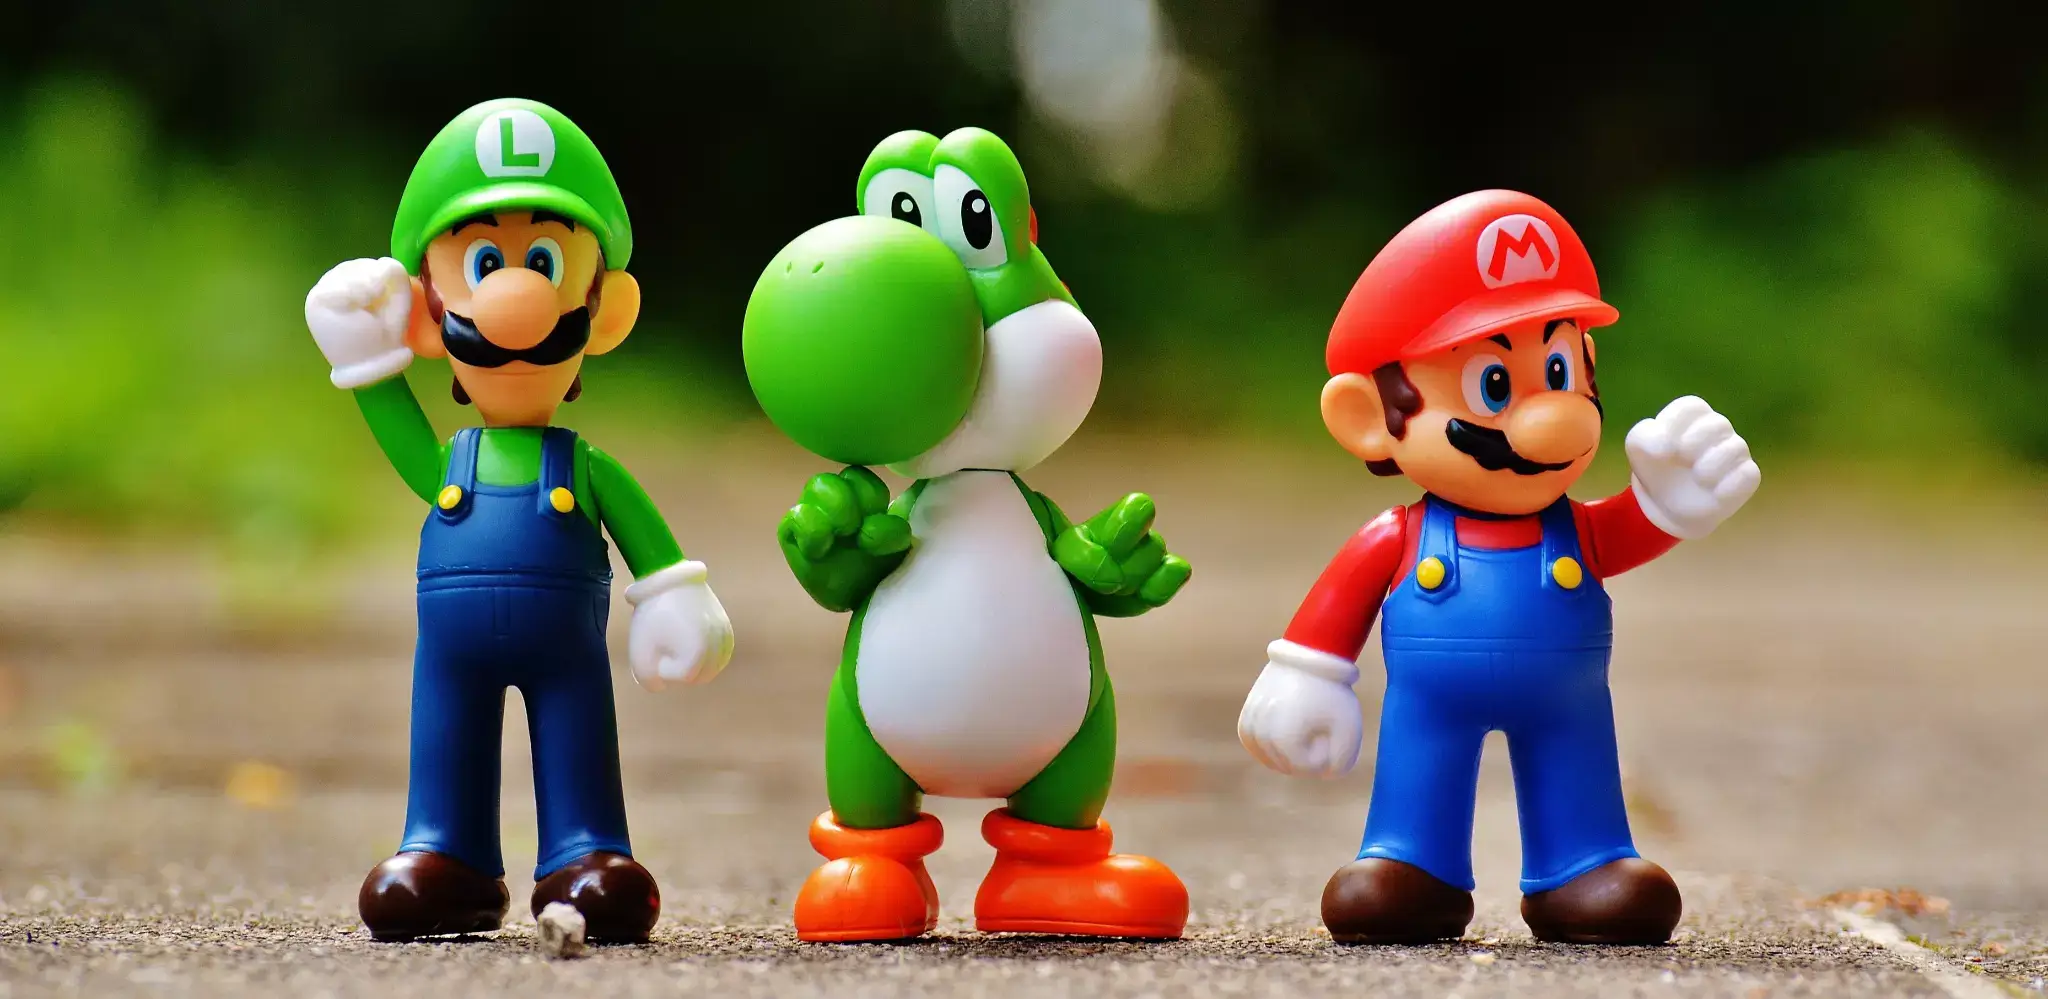 Luigi, Yoshi, and Mario standing side by side on a cement surface, with a blurred backdrop of what appears to be a park.